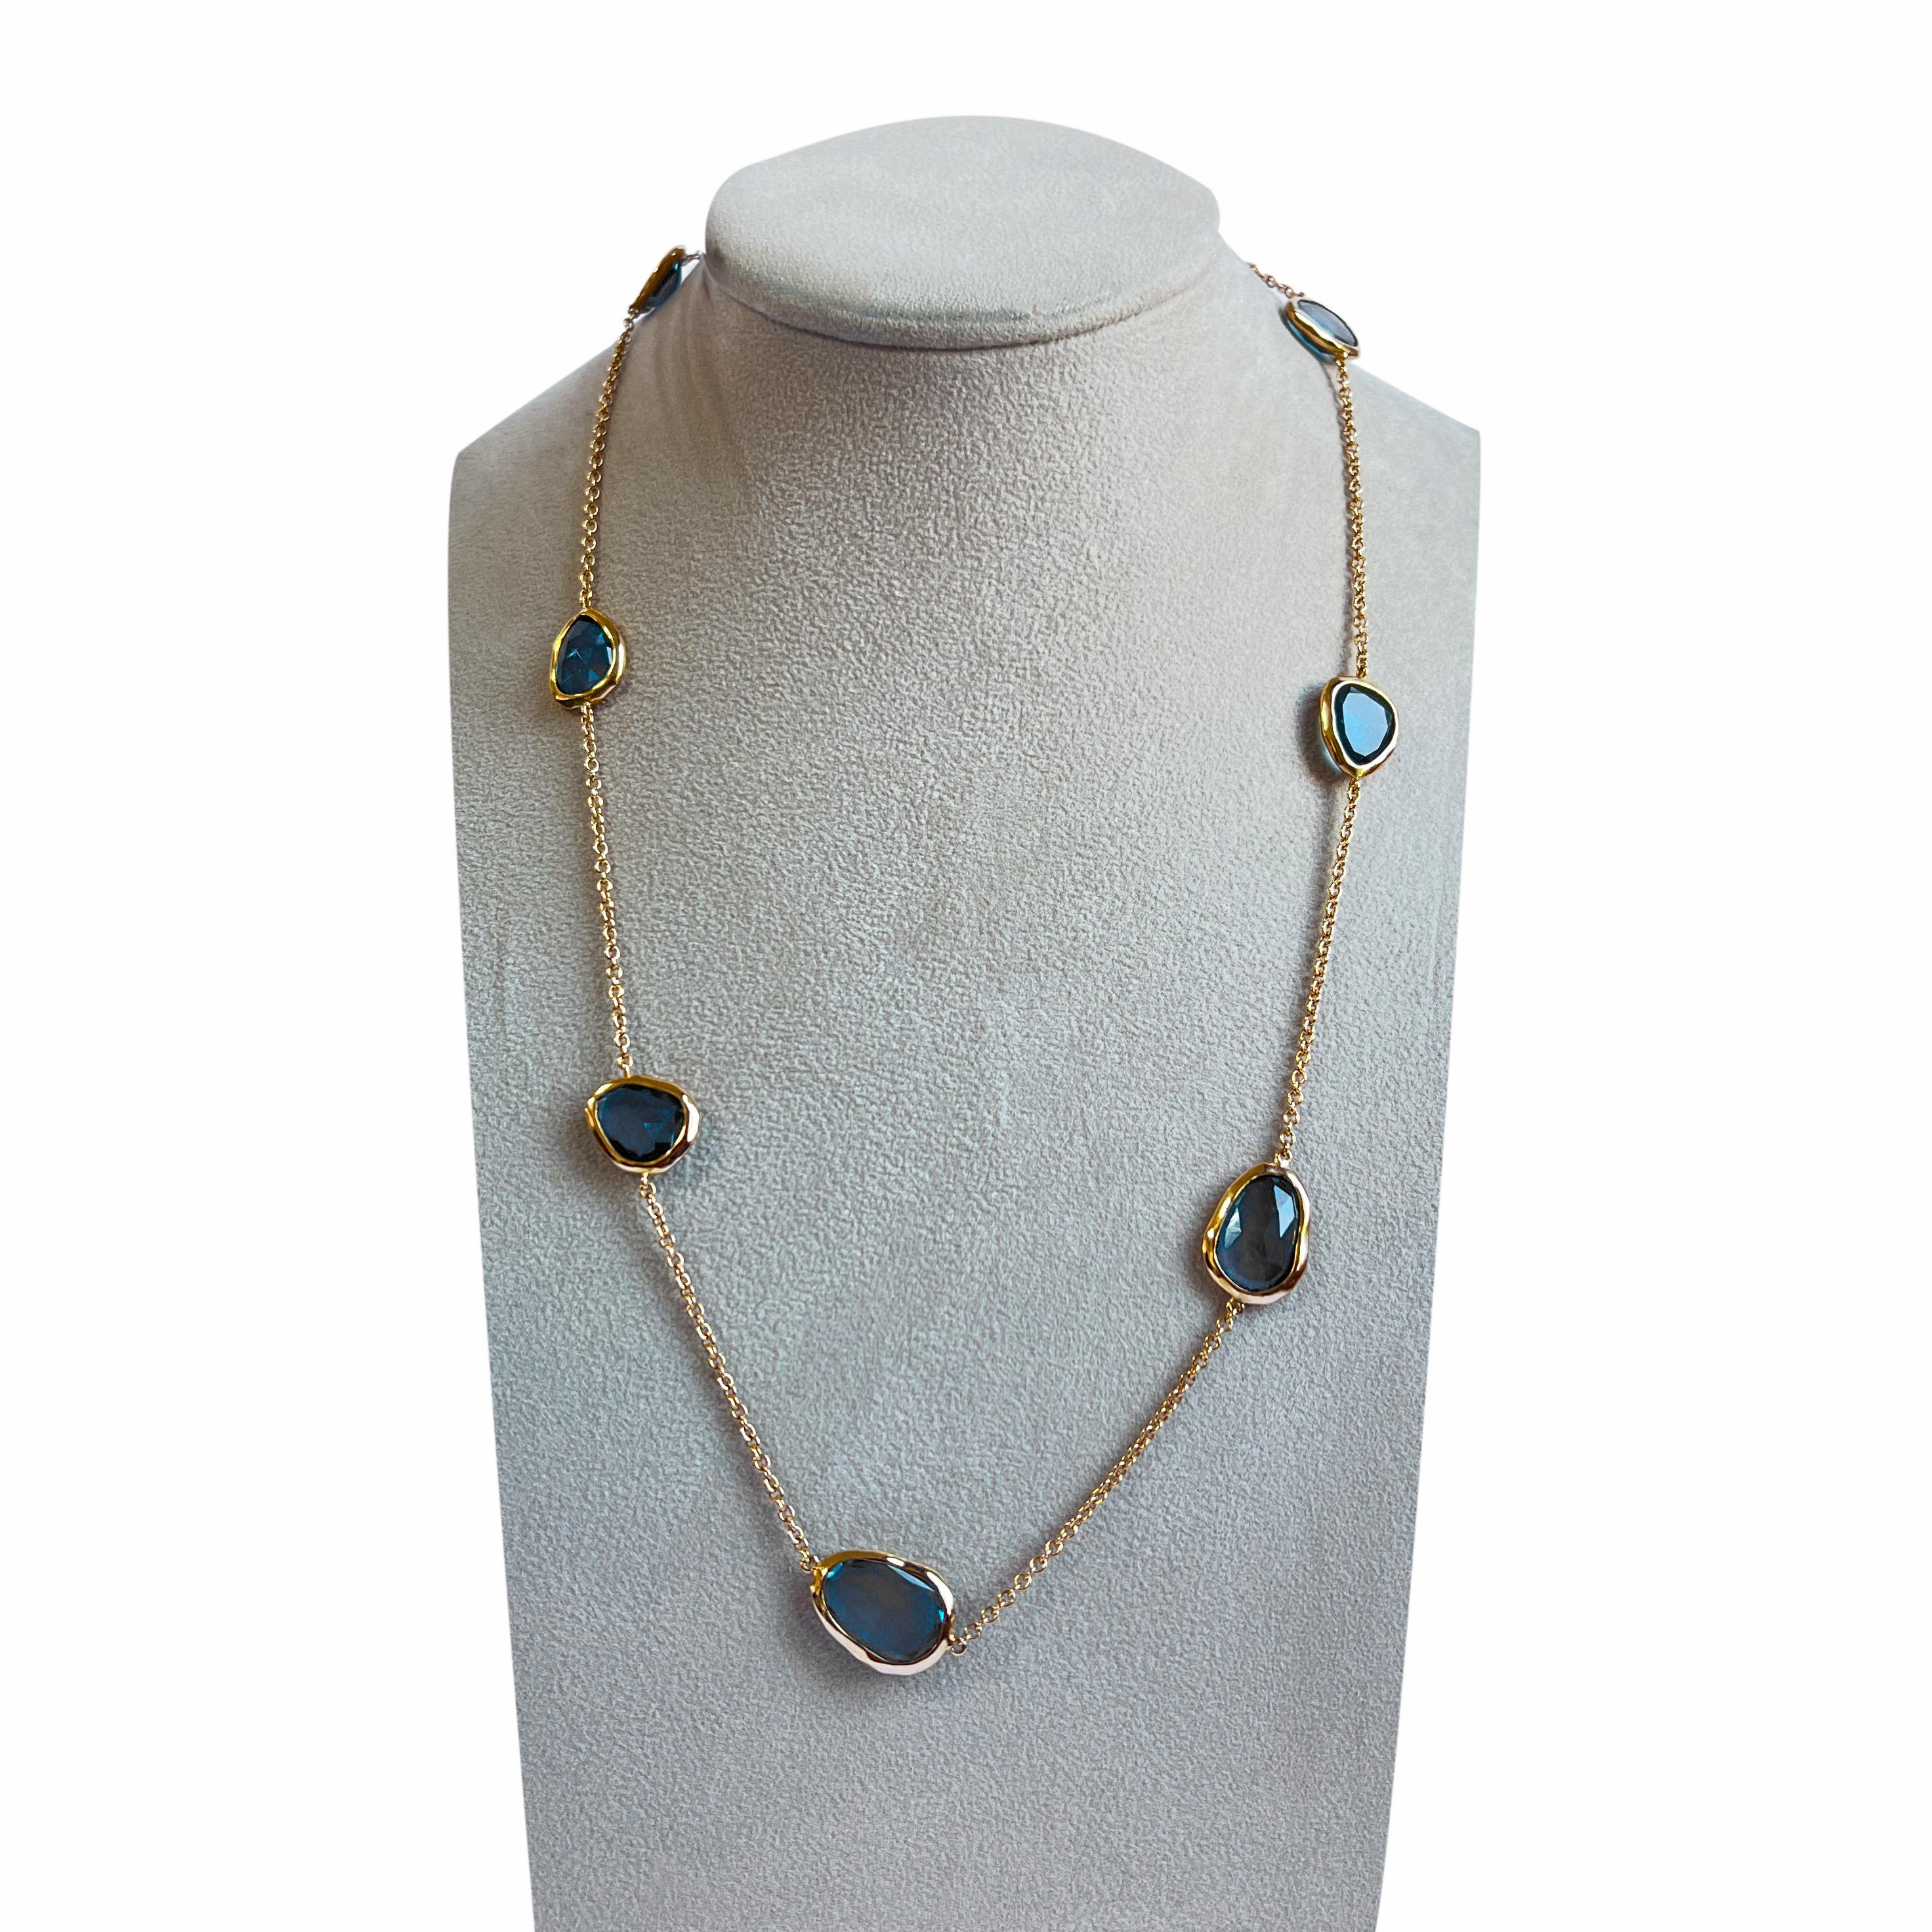 Modern 18kt Pink Gold Necklace chanel style chain with Blue Topaze Gems For Sale